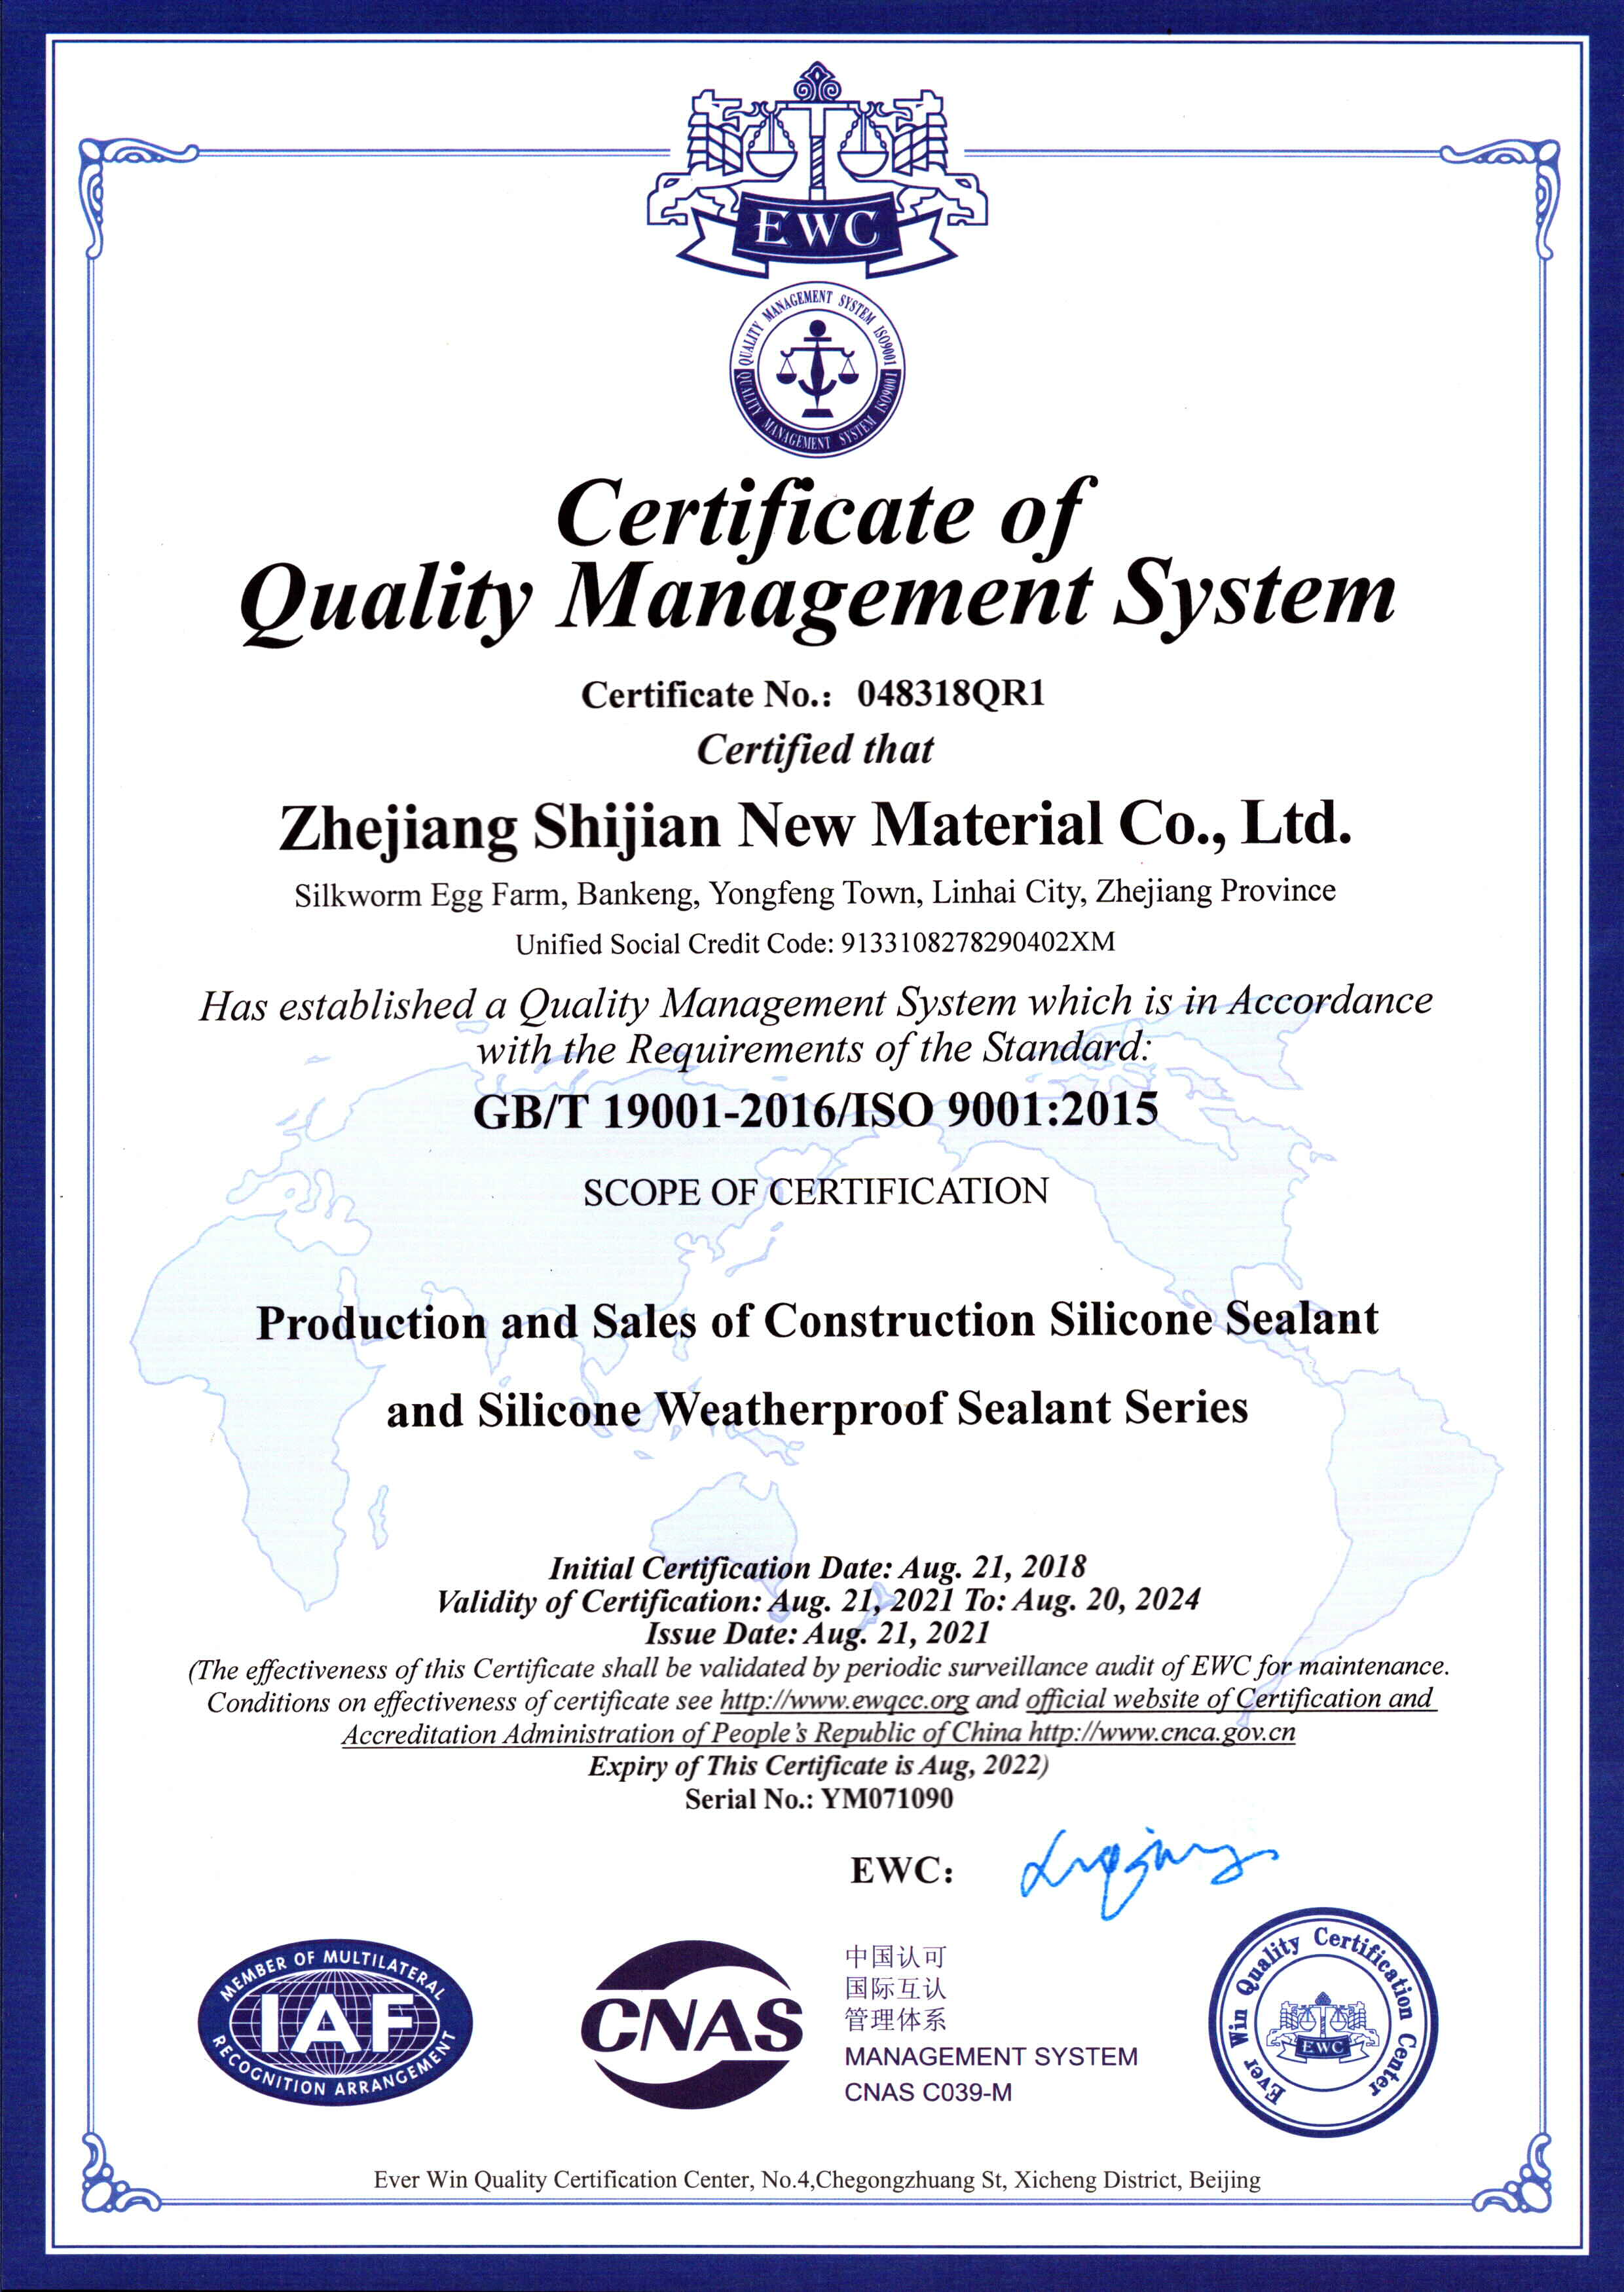 Iso9001:2005 quality management system certificate English (2021)